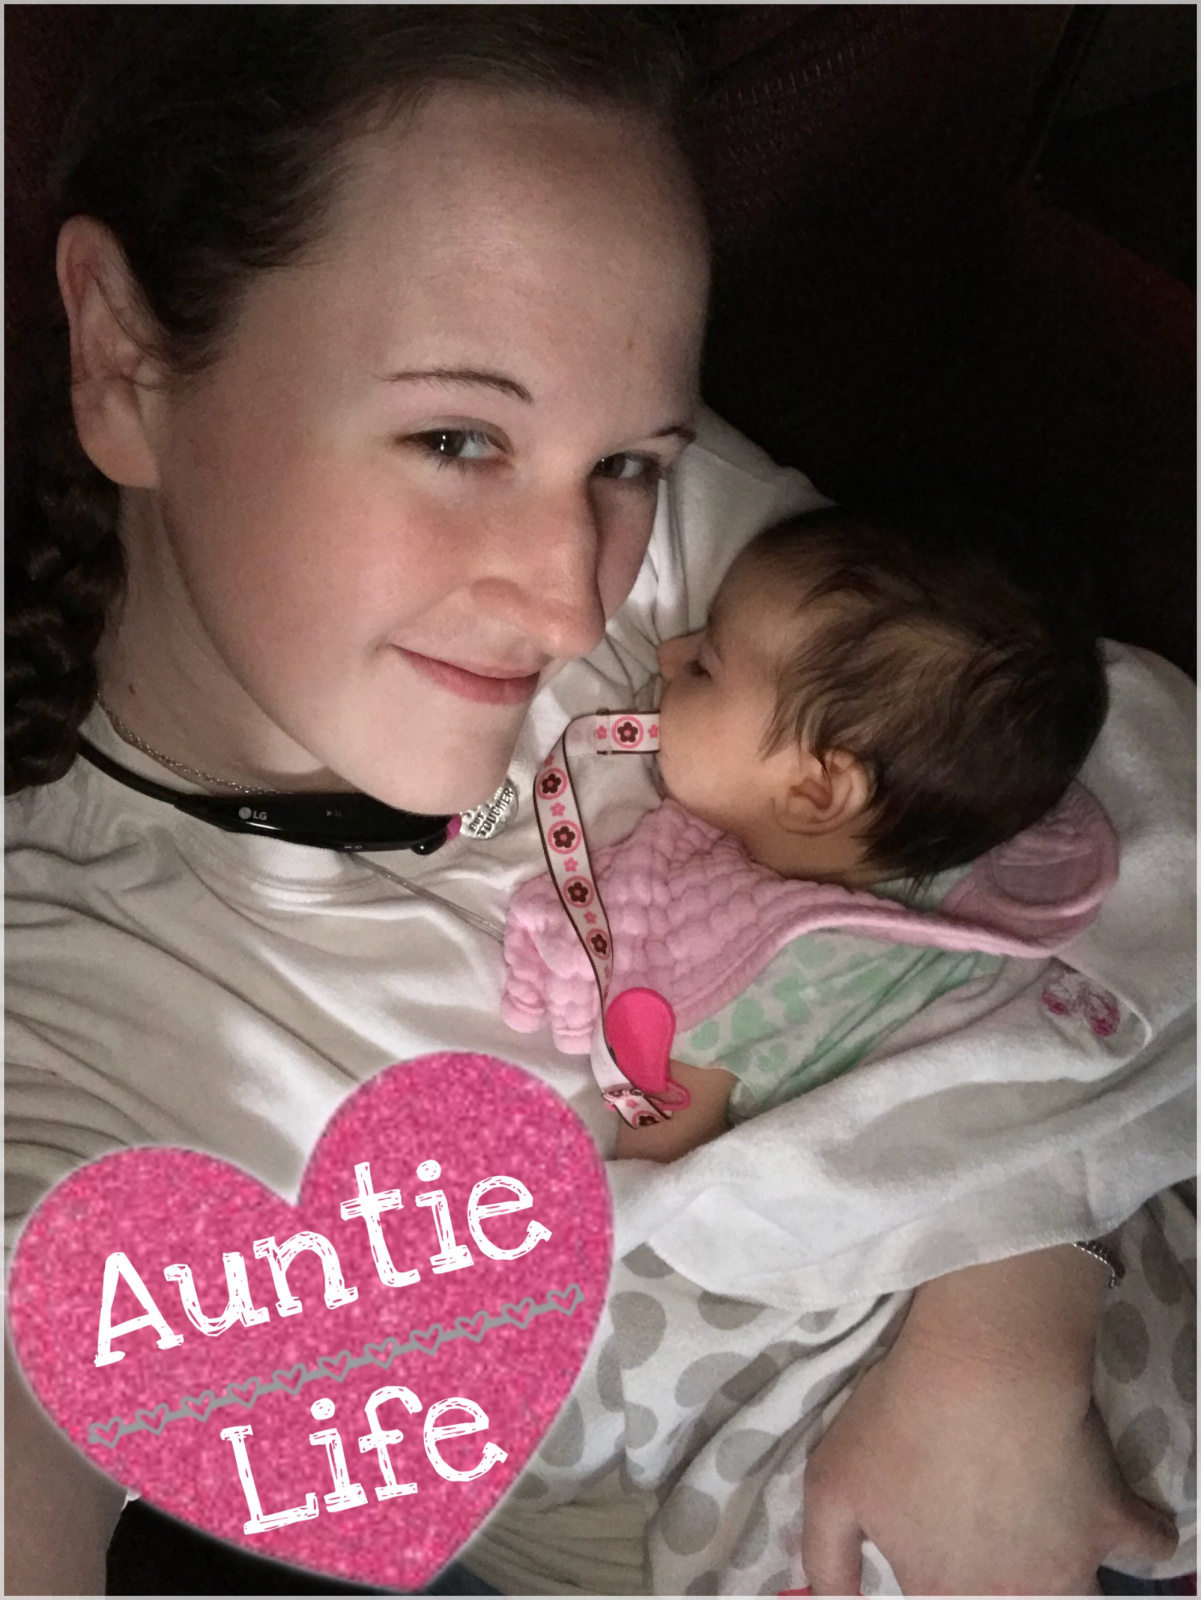 Nothing like sleeping baby snuggles... I love being an auntie!